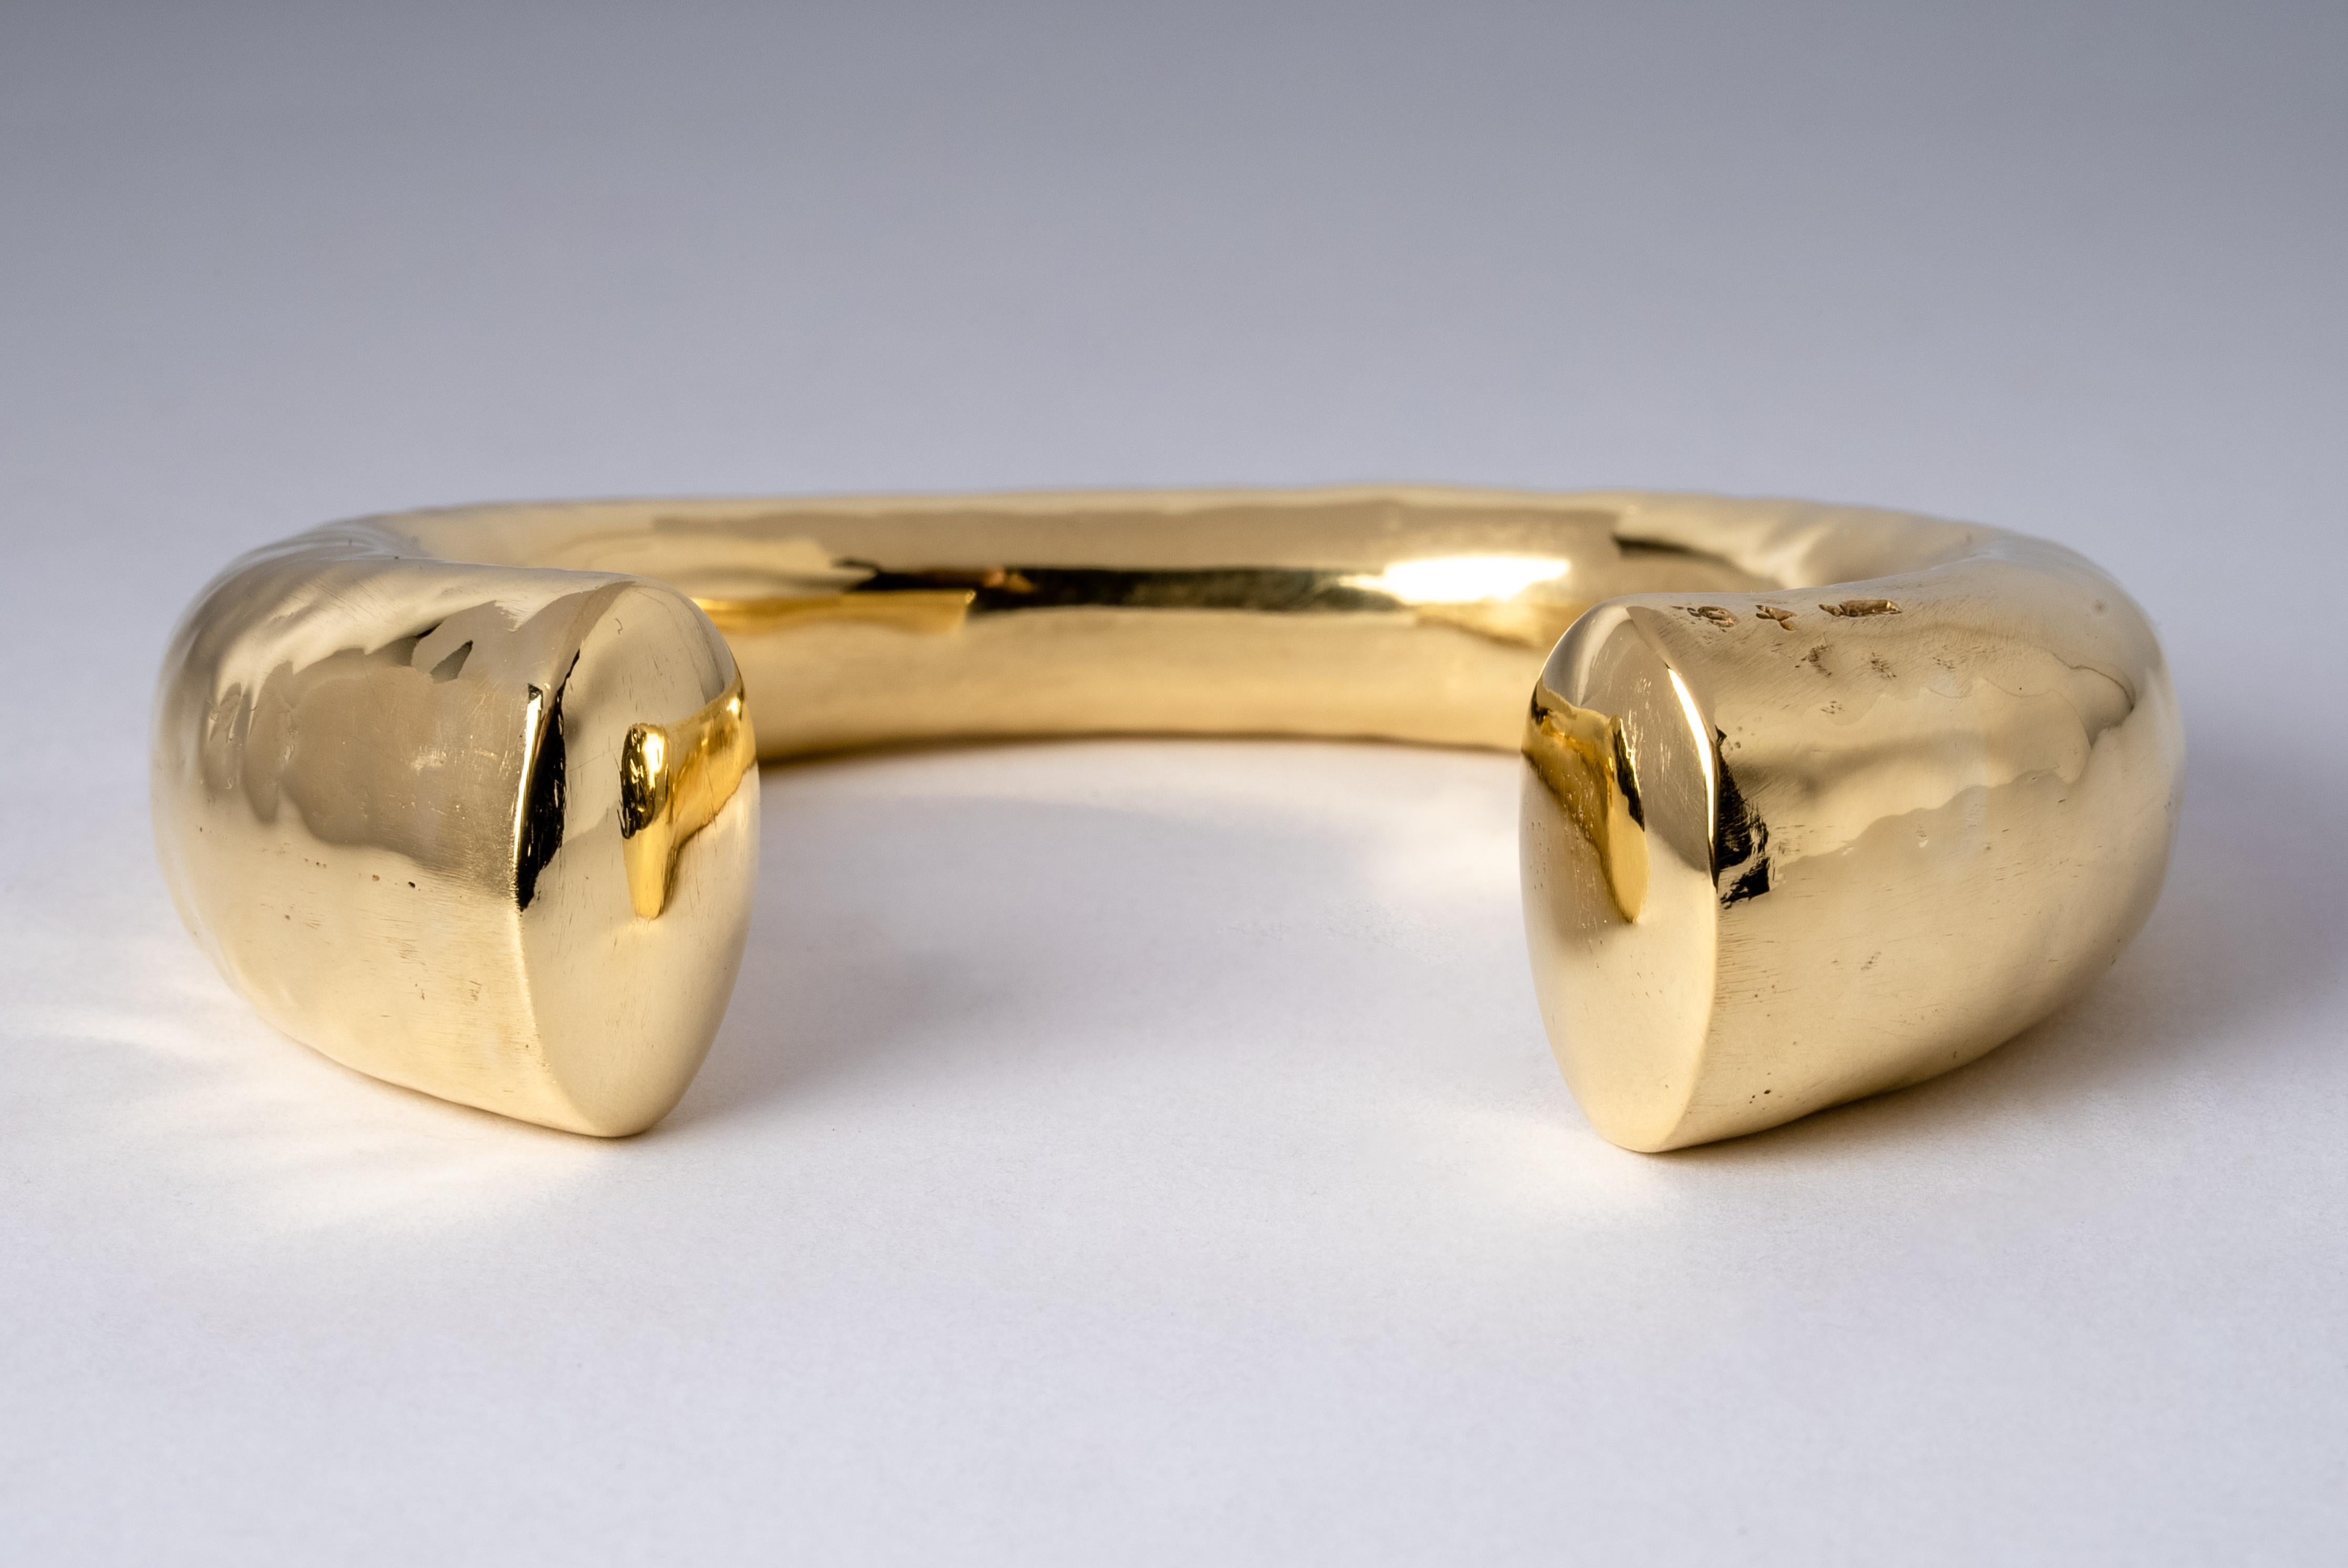 Bracelet in brass. The color of bright gold from brass substrate, polished and electroplated with 18k gold. This piece is 100% hand fabricated from metal plate; cut into sections and soldered together to make the hollow three dimensional form. If